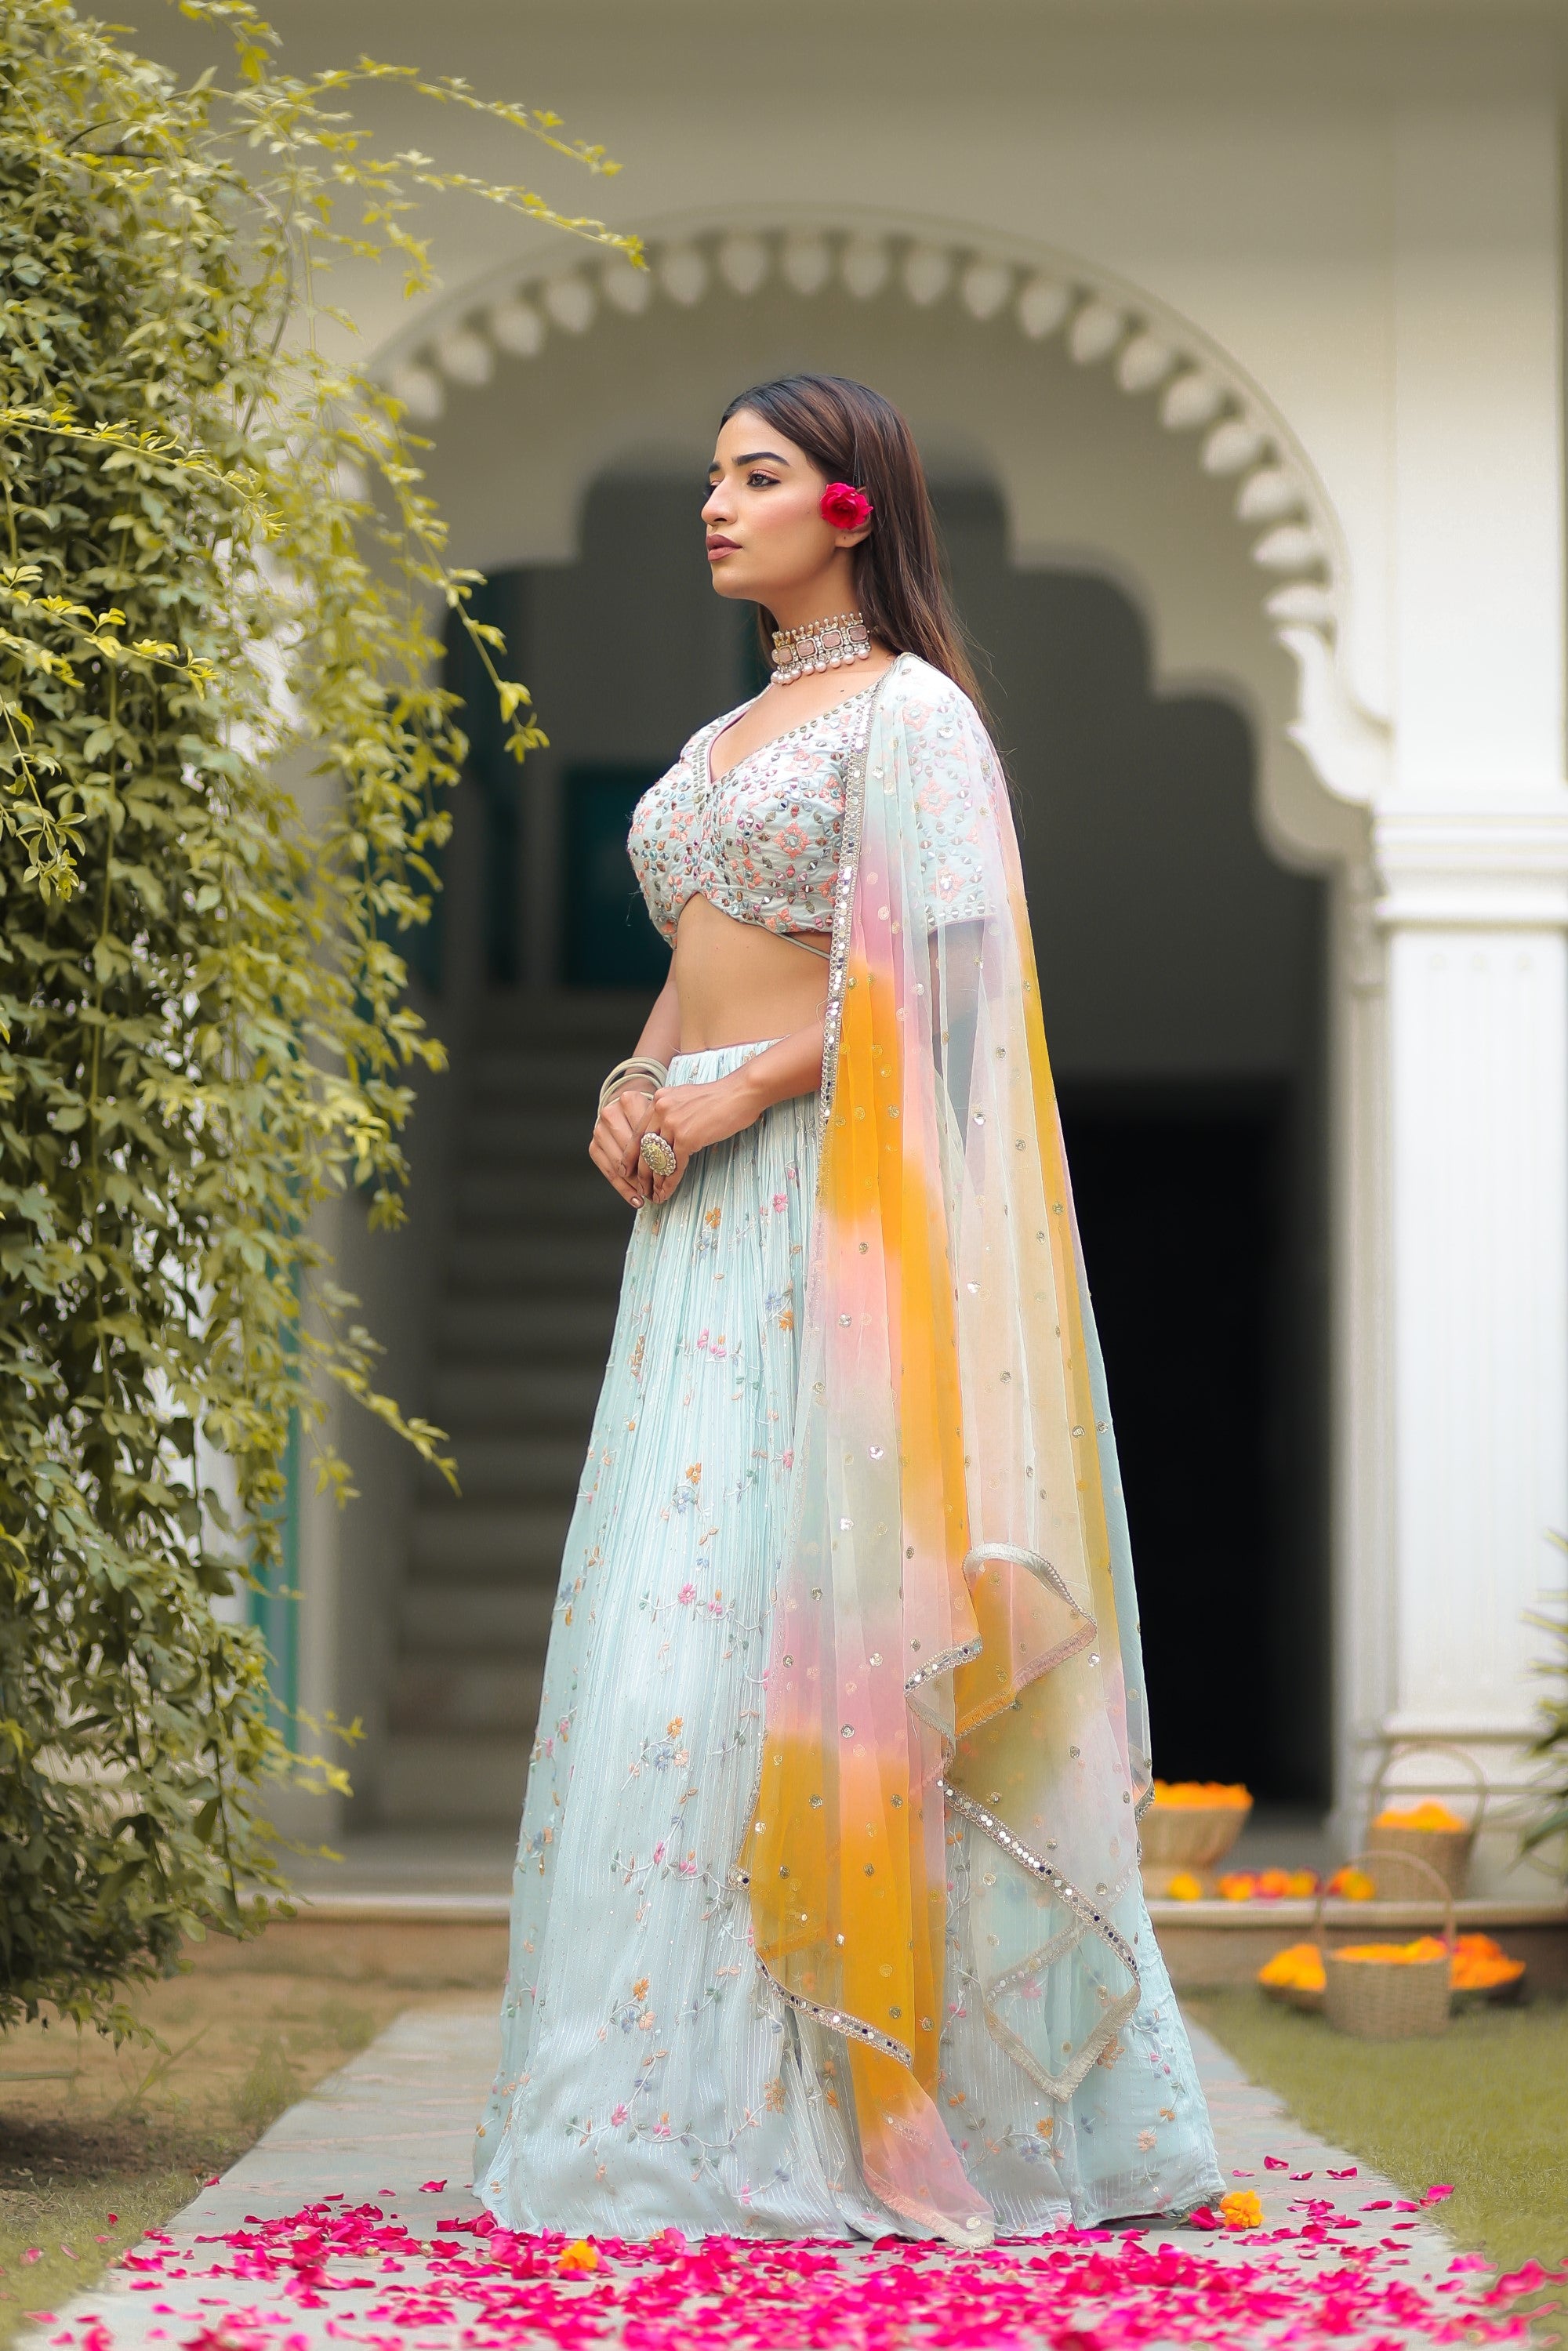 Which is the best online shopping site for a designer lehenga in India? -  Quora